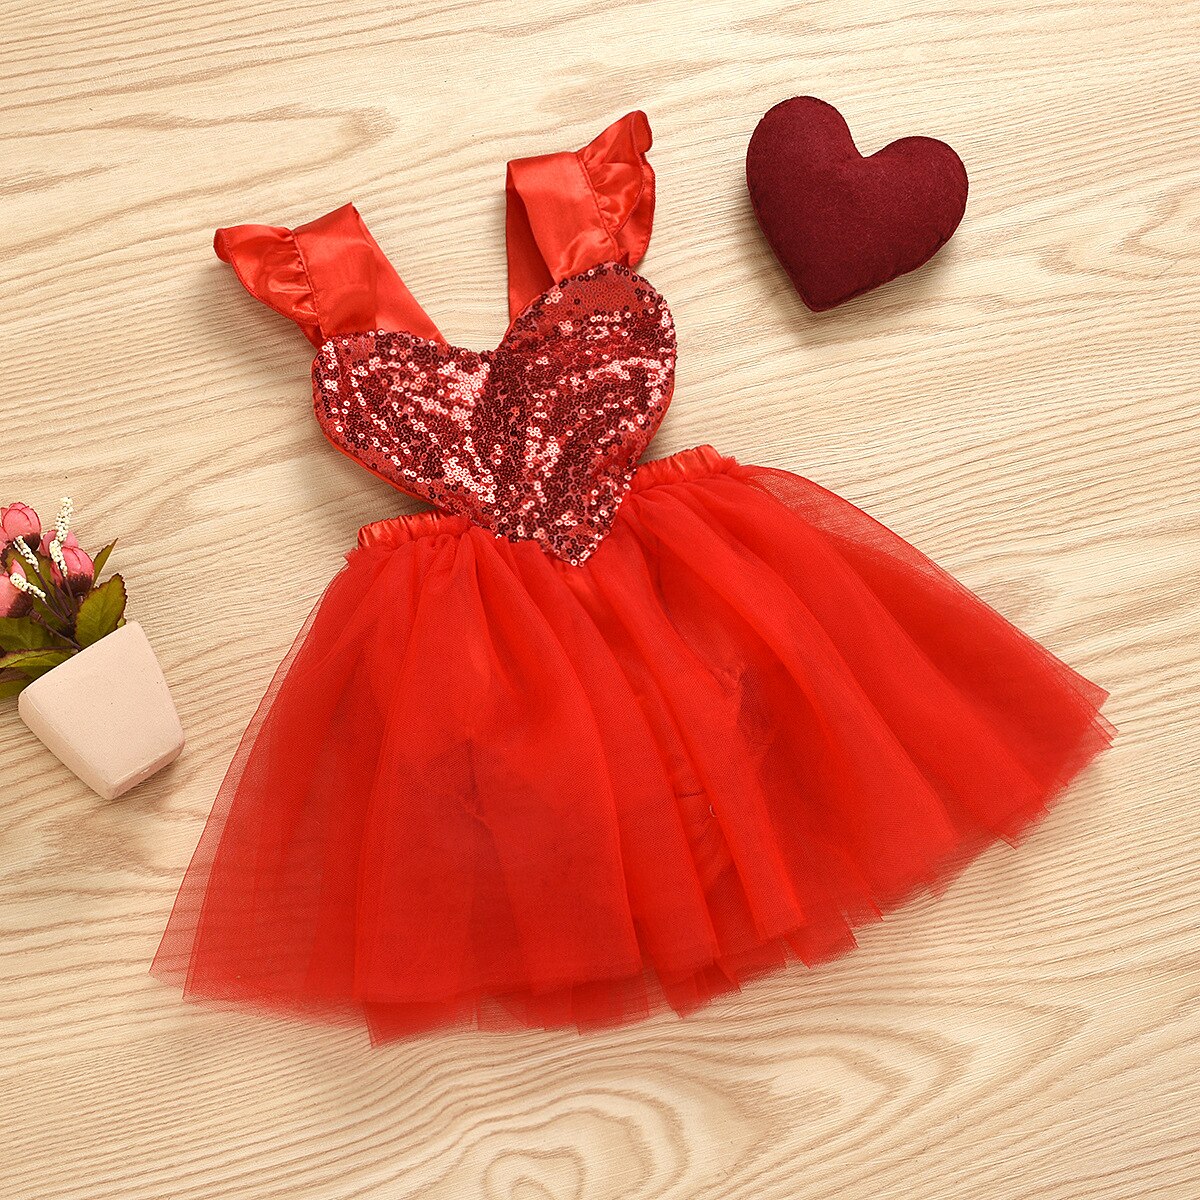 Valentines-Day-Baby-Girls-Dress-Party-Princess-Dresses-Red-Flying-Sleeve-Love-Heart-Sequined-Mesh-Stitching-1